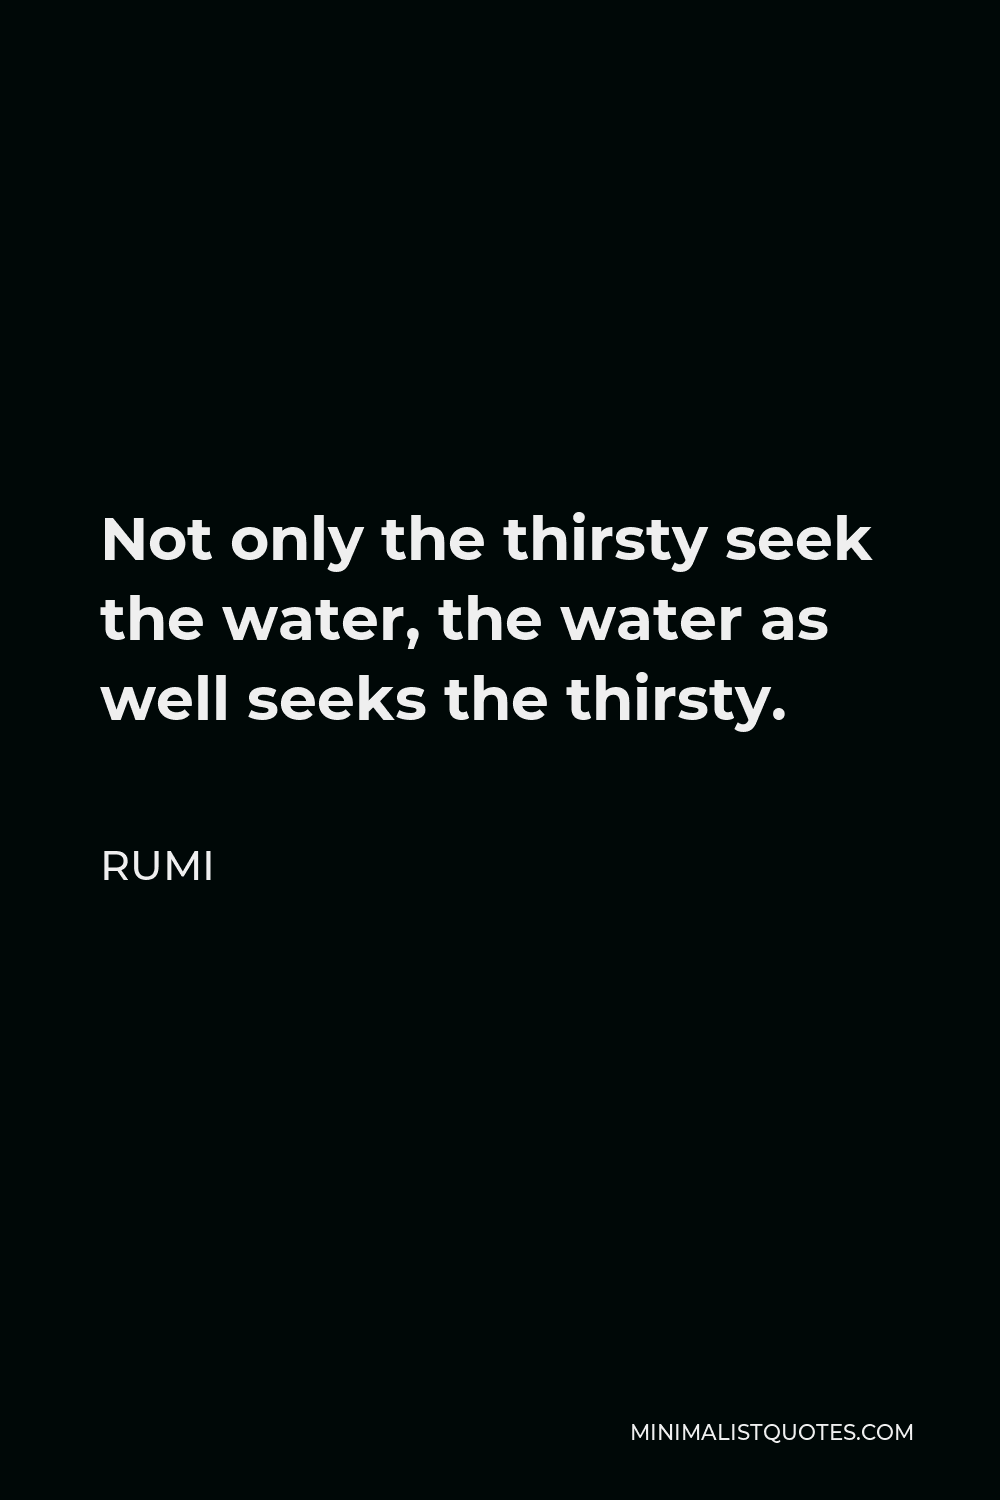 Rumi Quote - Not only the thirsty seek the water, the water as well seeks the thirsty.